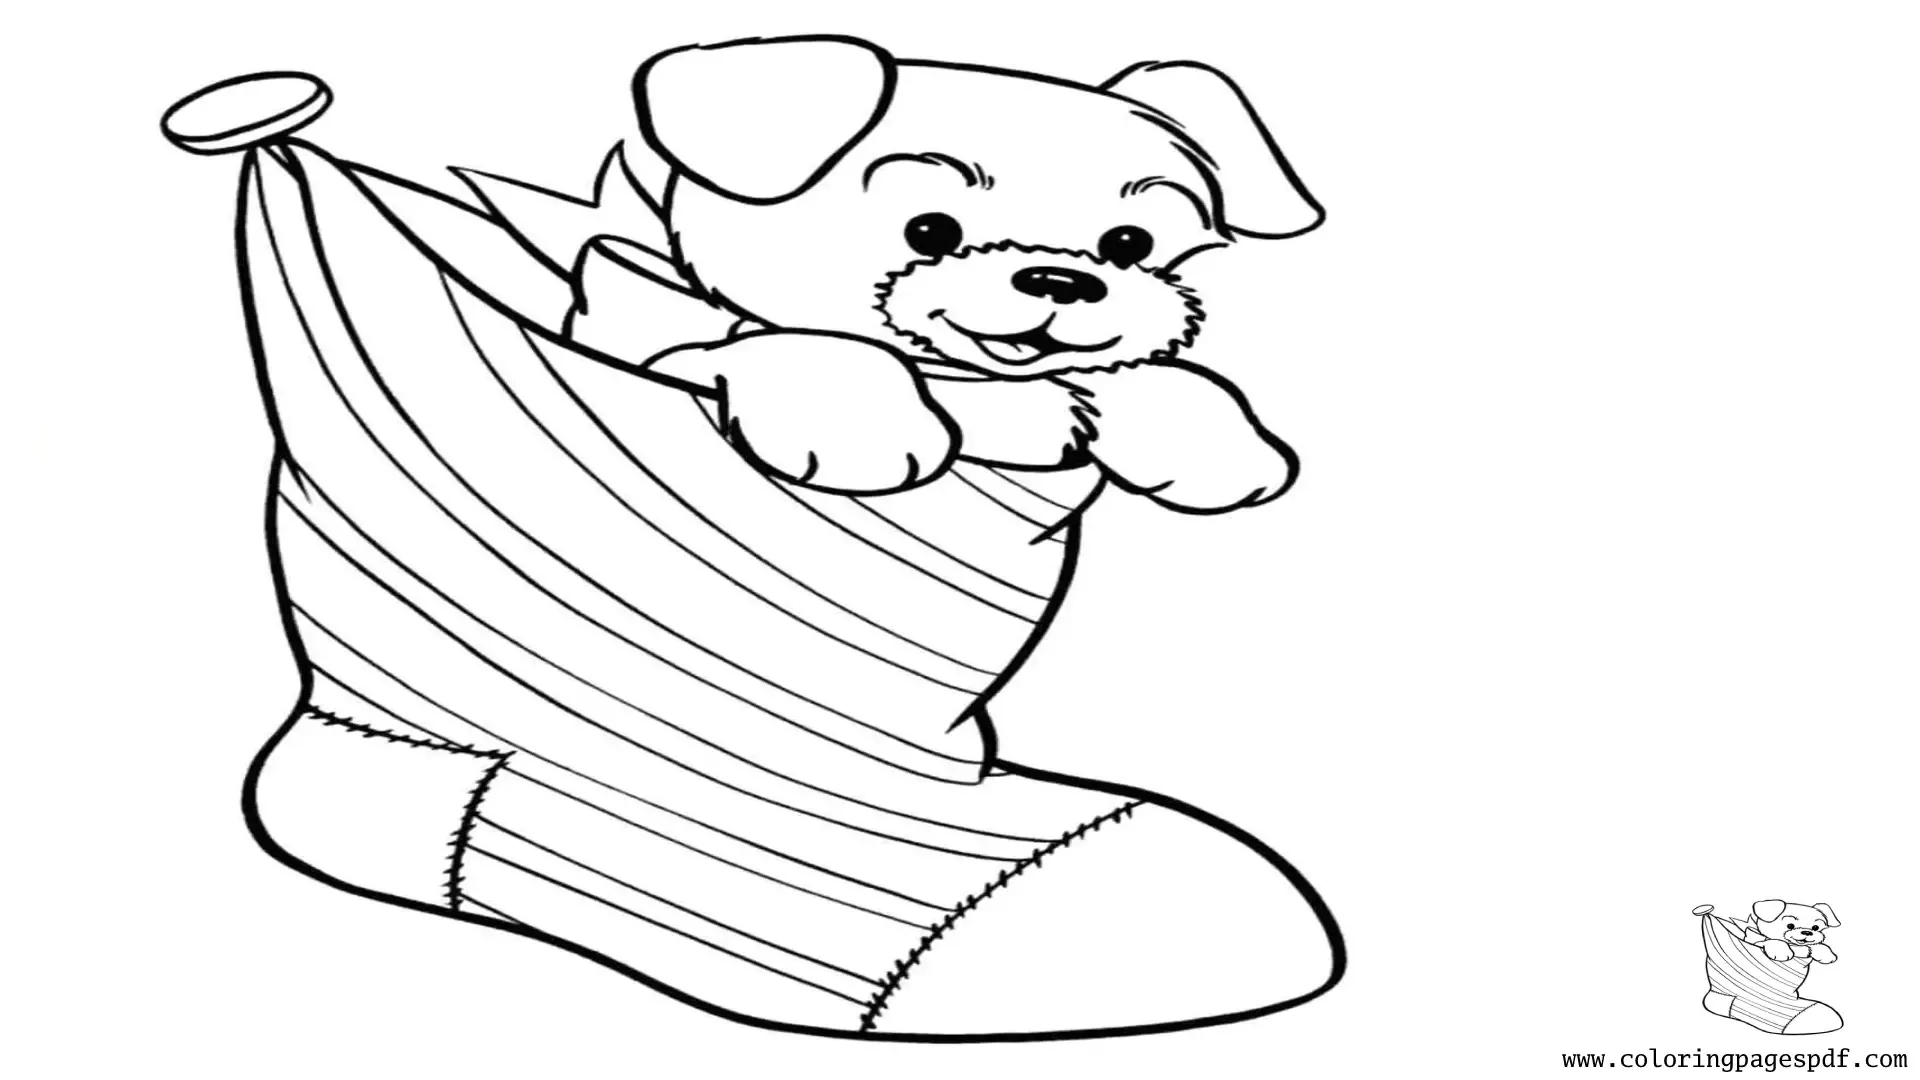 Coloring Page Of A Puppy In A Christmas Stocking